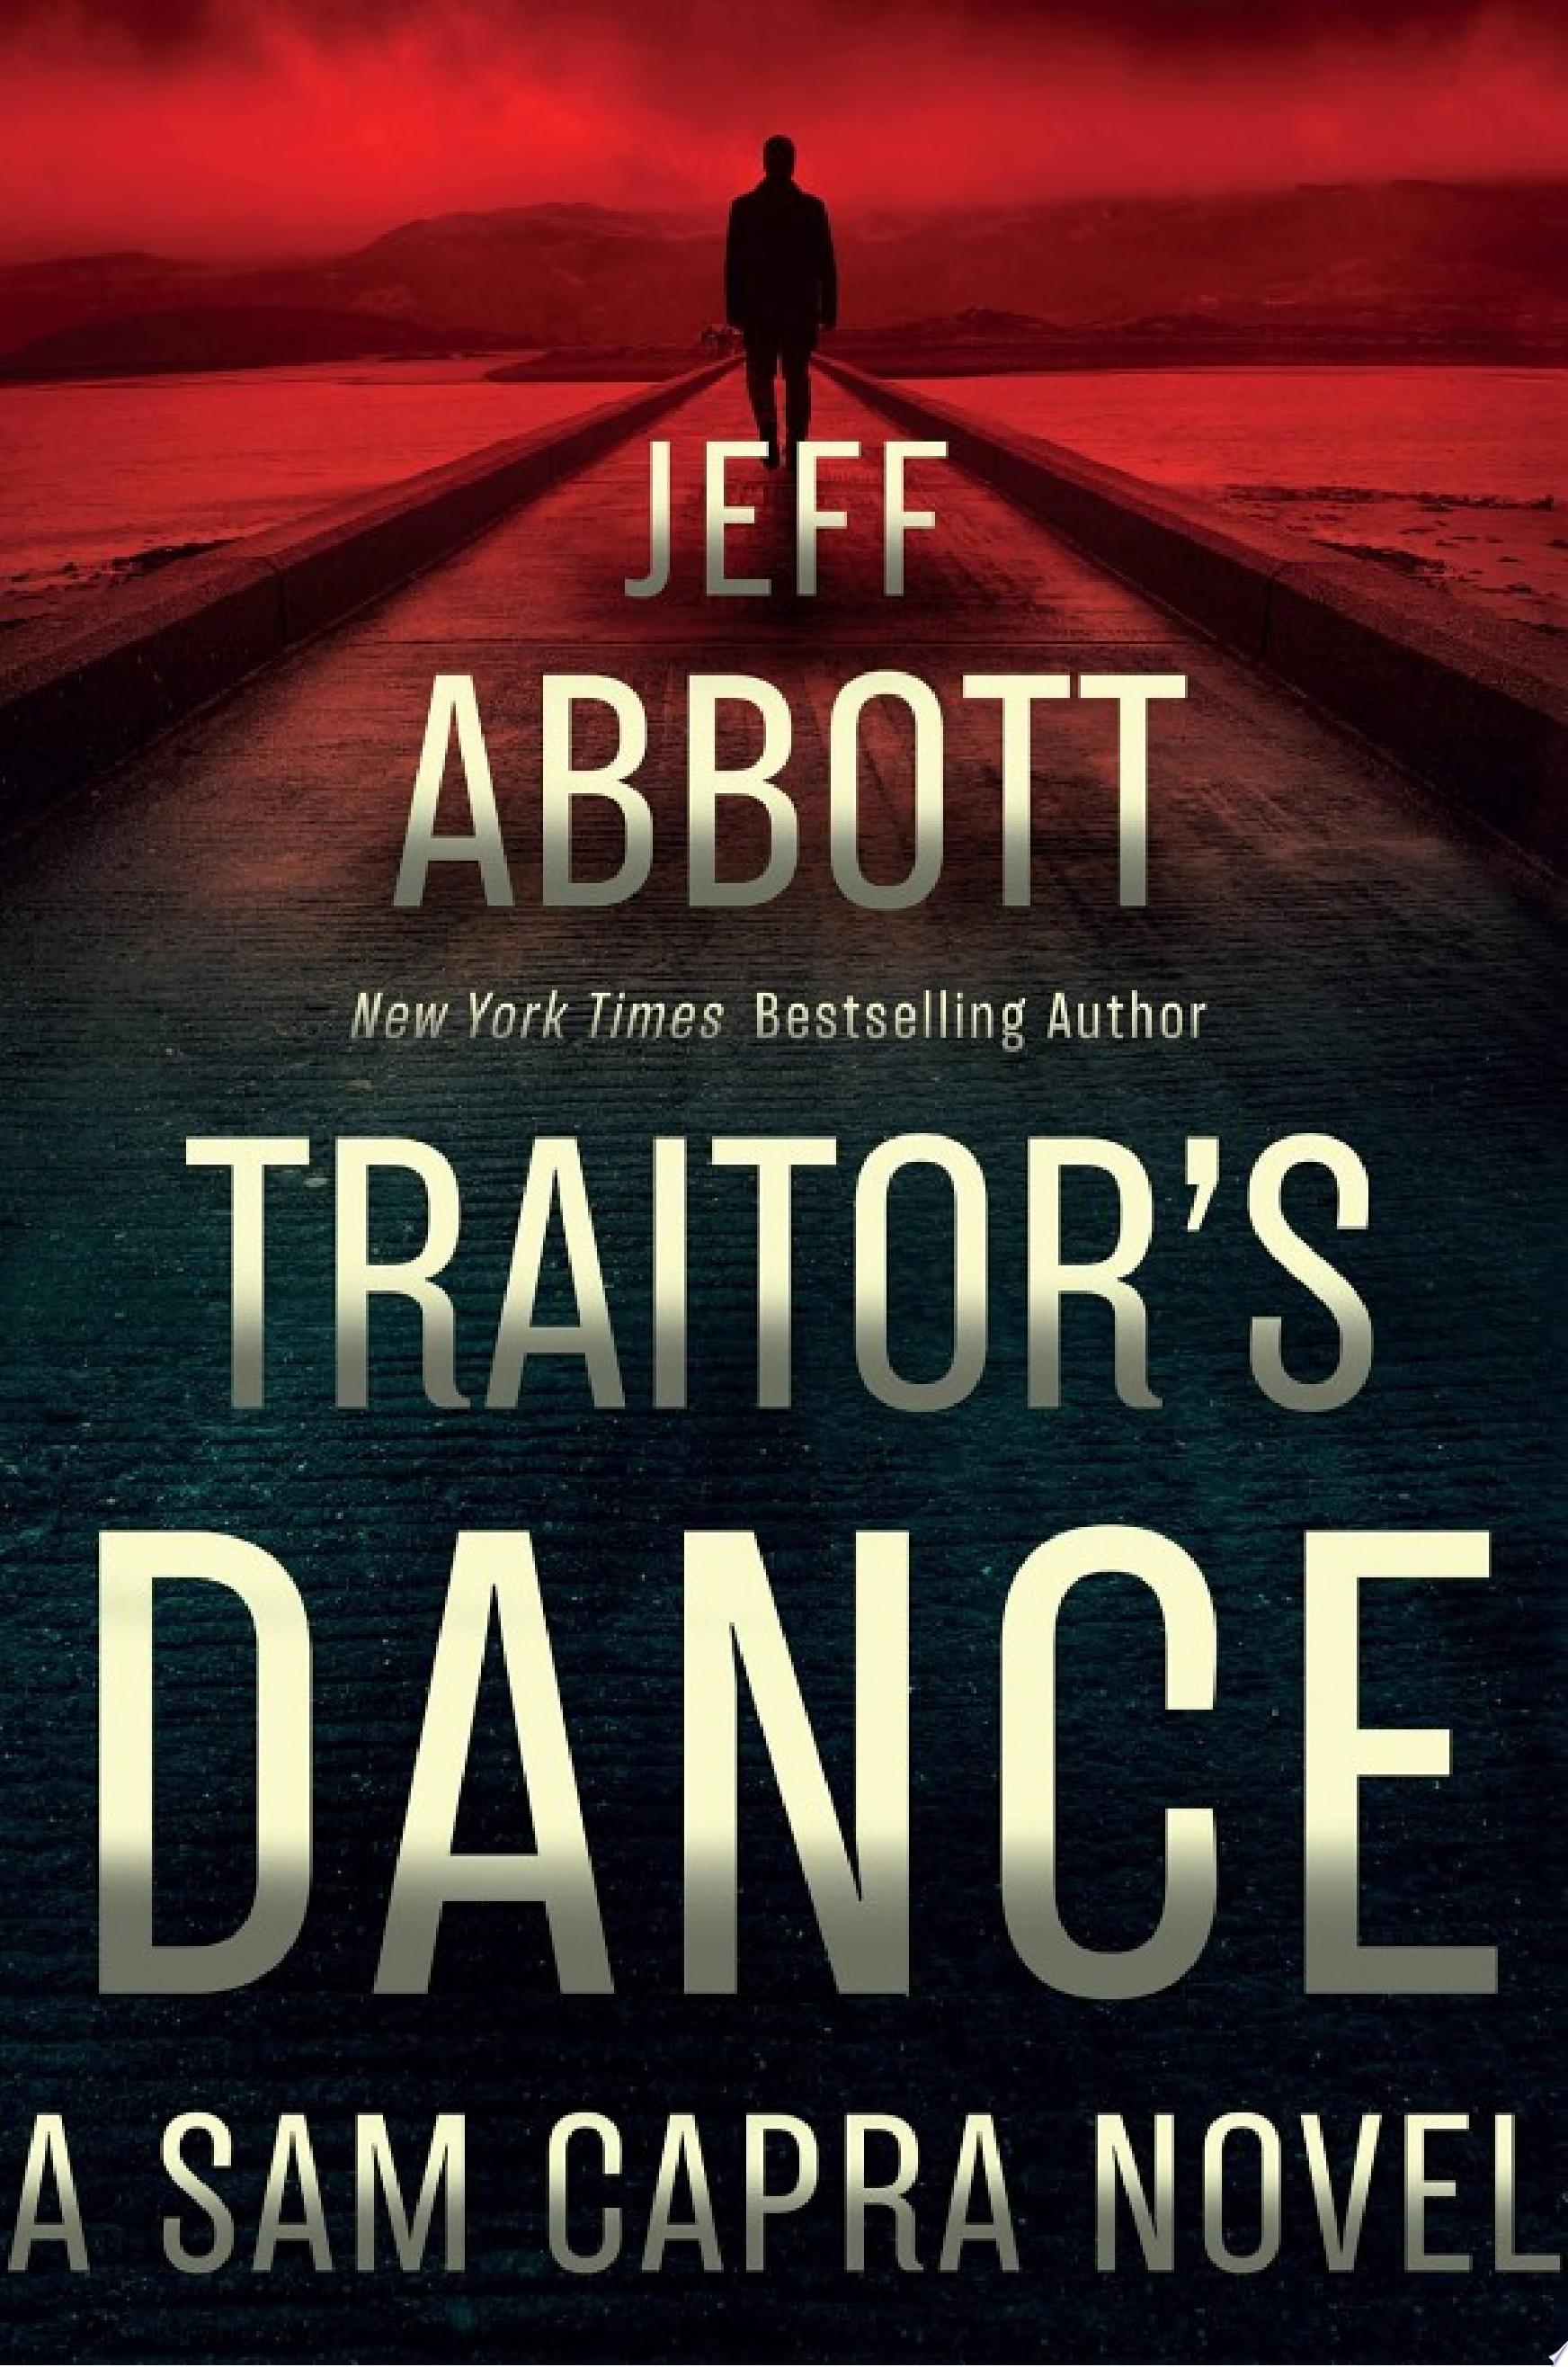 Image for "Traitor's Dance"